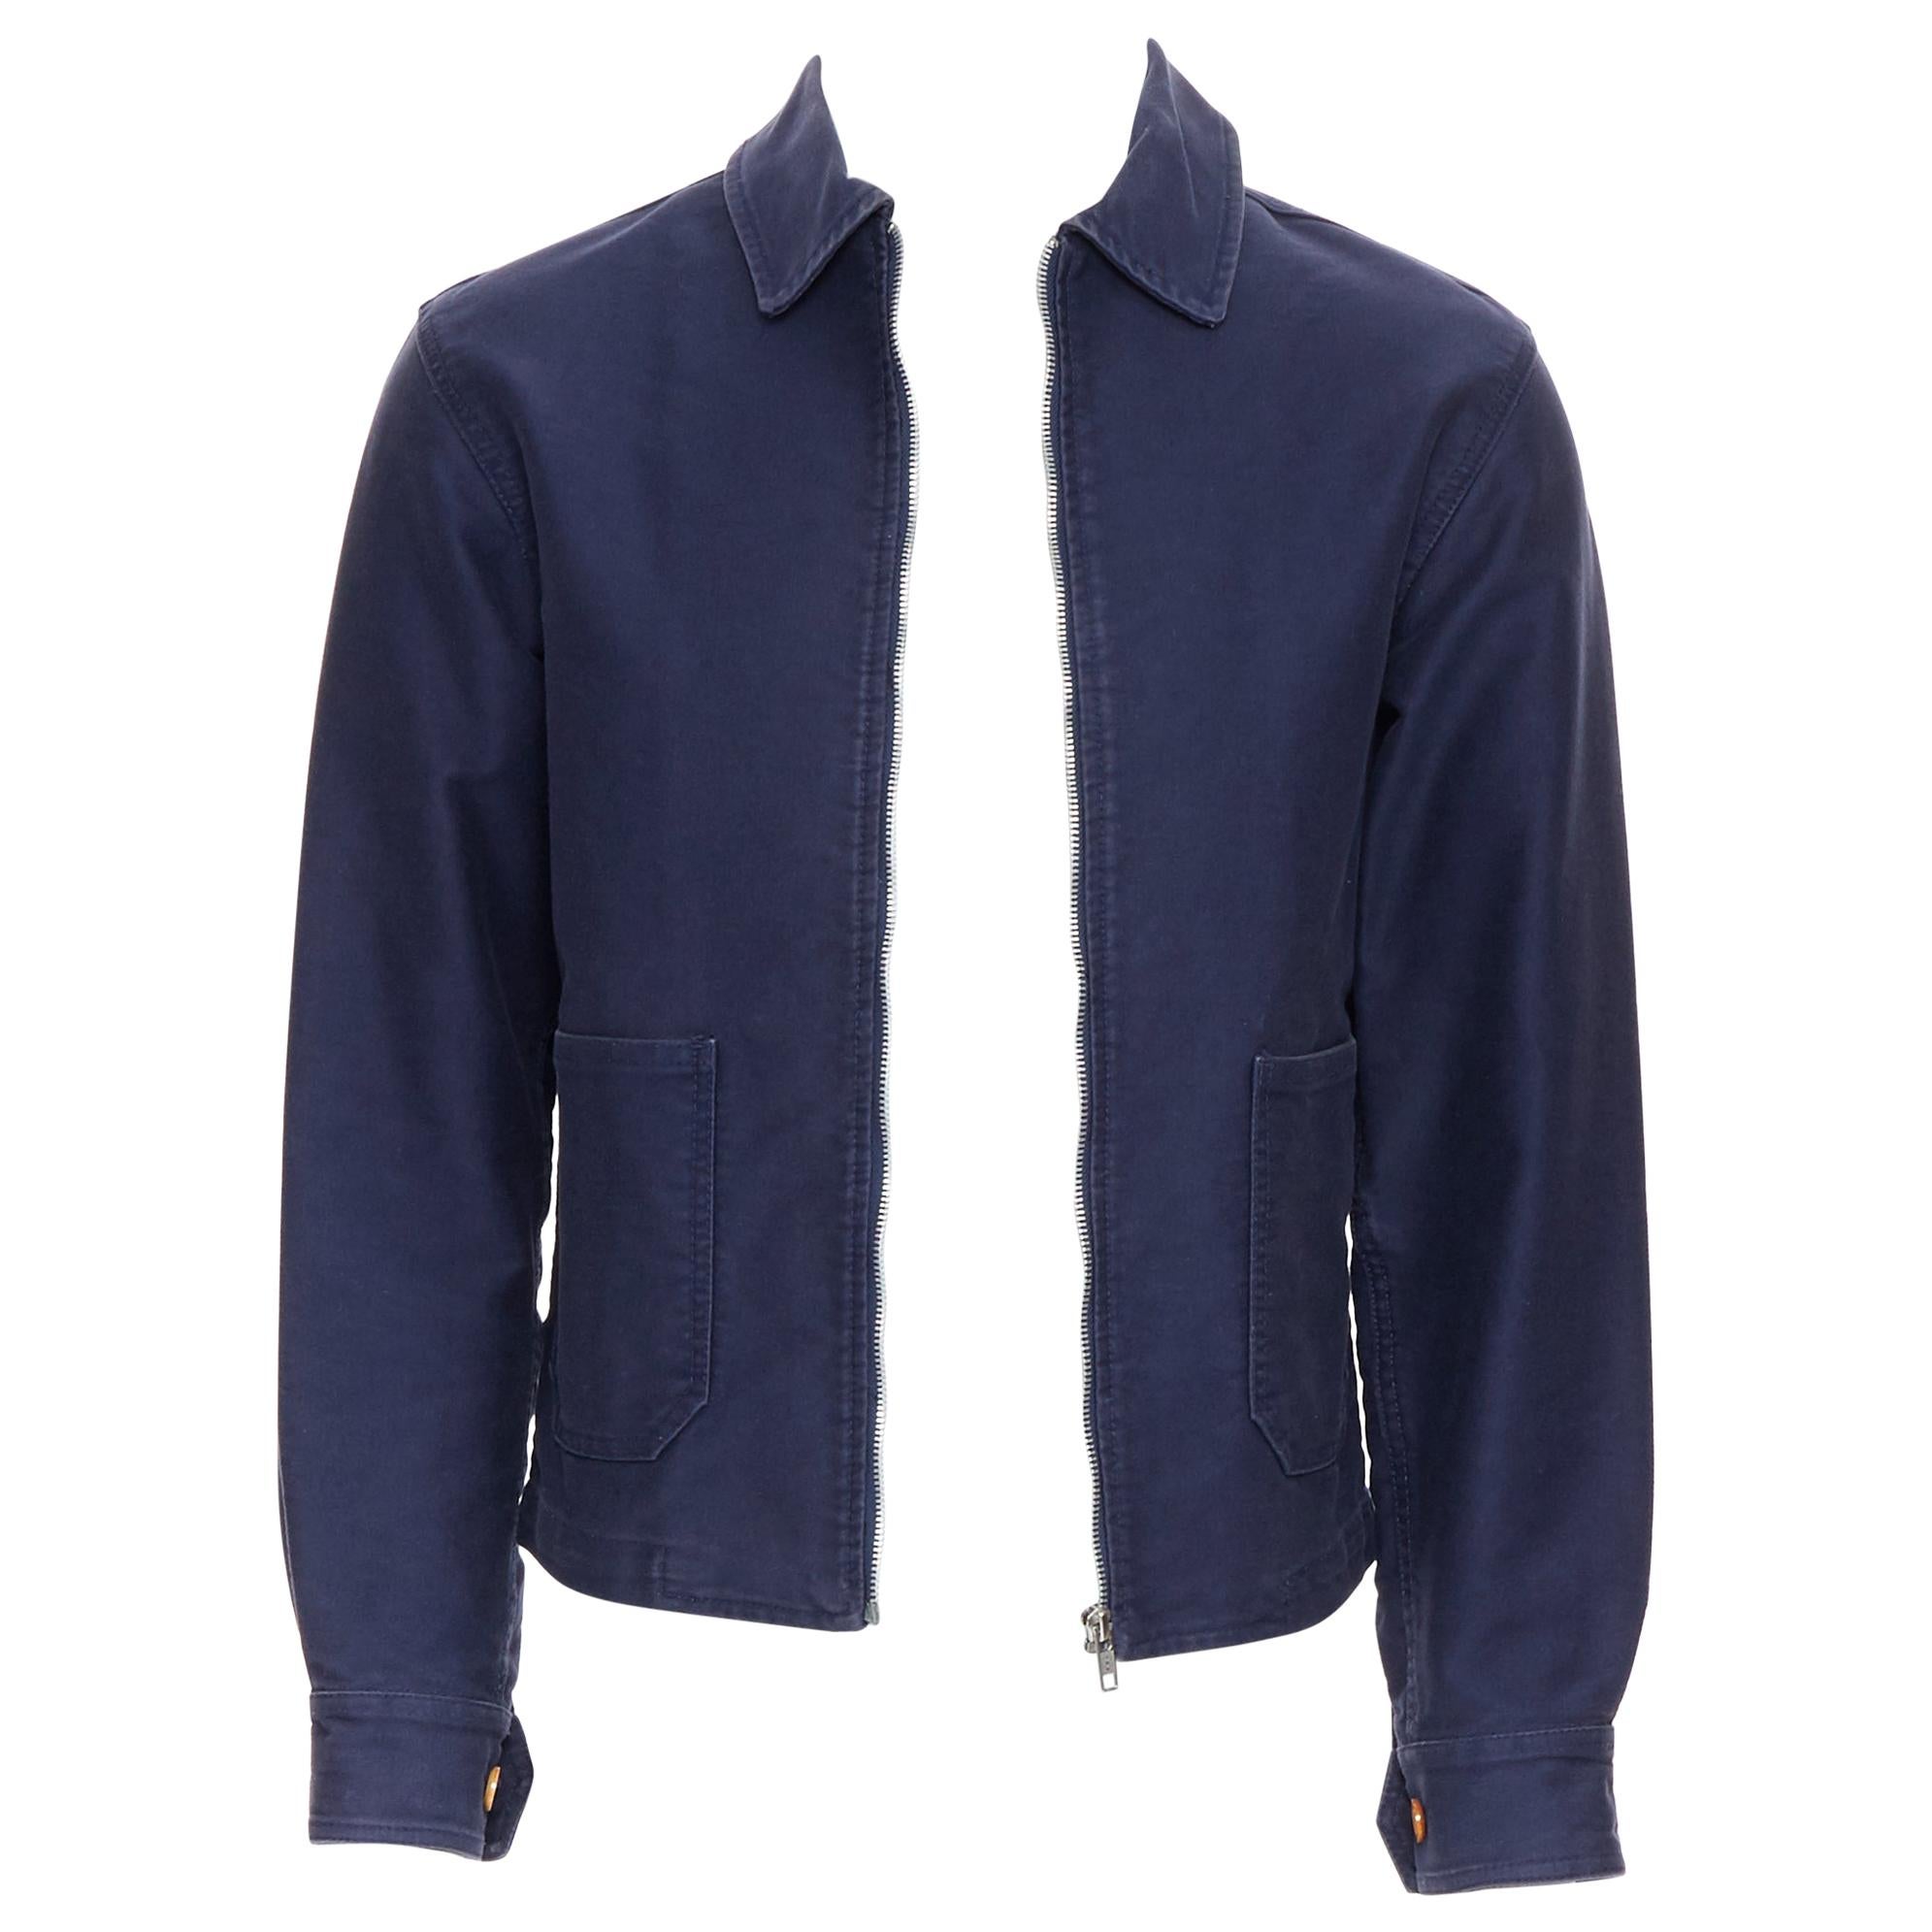 COMME DES GARCONS SHIRT navy blue washed cotton zip front worker jacket XS